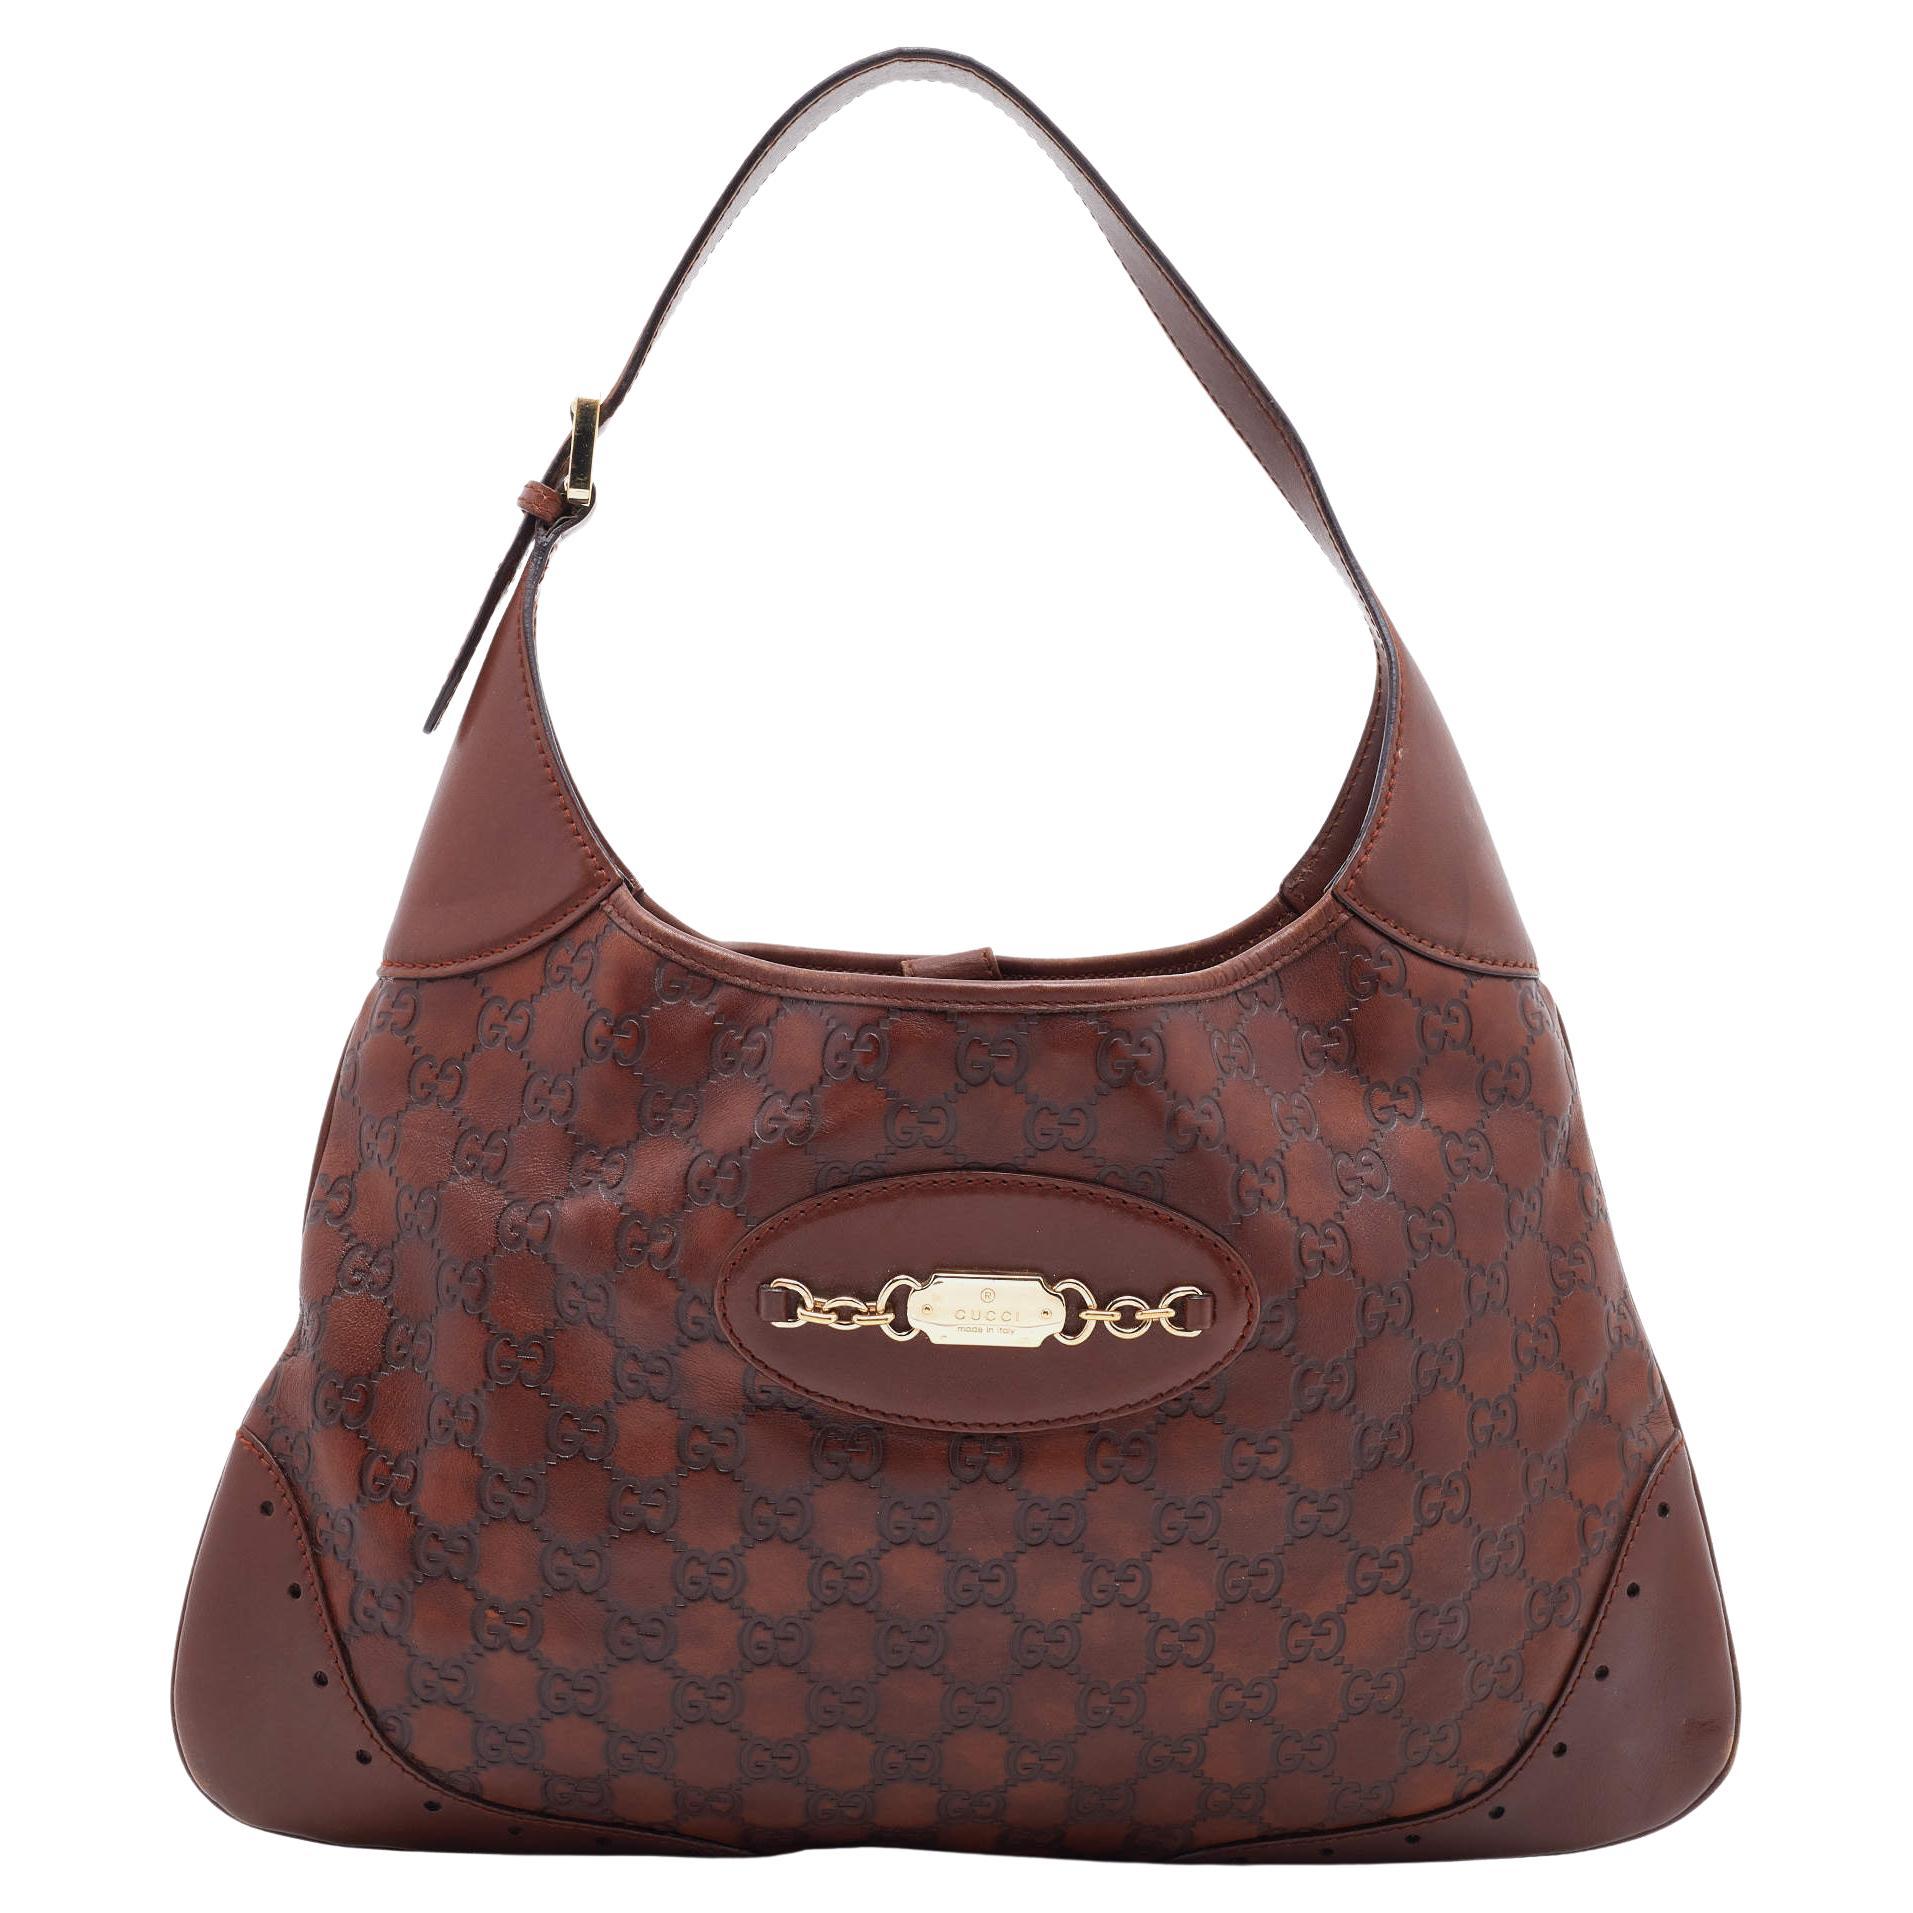 Gucci Brown Guccissima Leather Punch Hobo